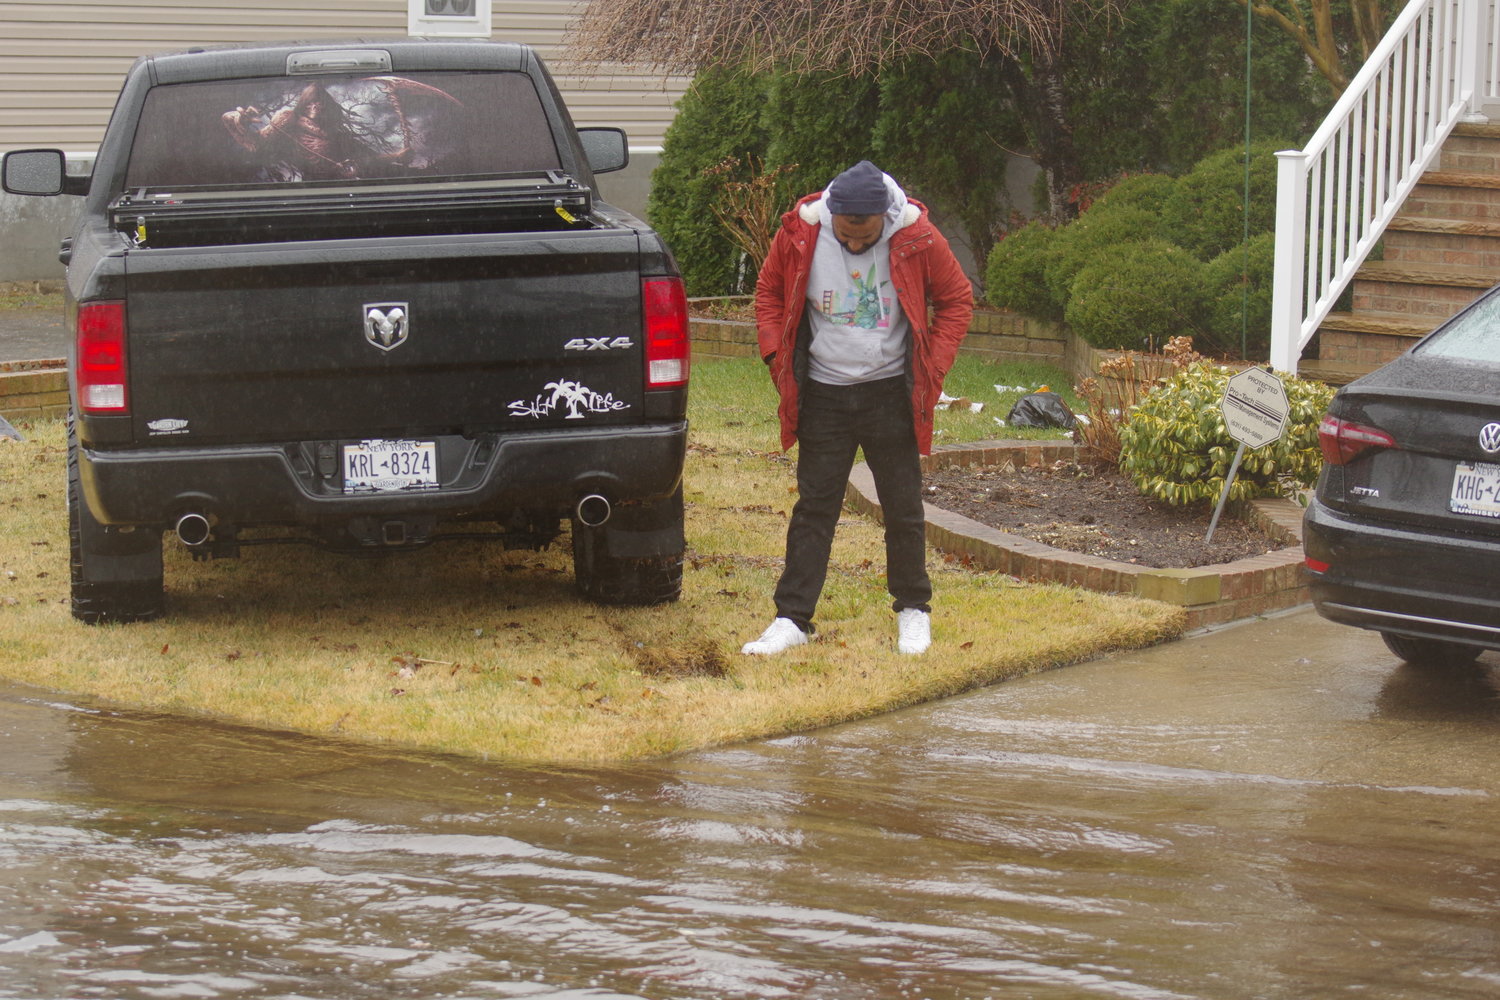 Freeport resident Vishun Rambhajue had to park his car on his lawn due to excessive amount of water in his driveway and the streets.